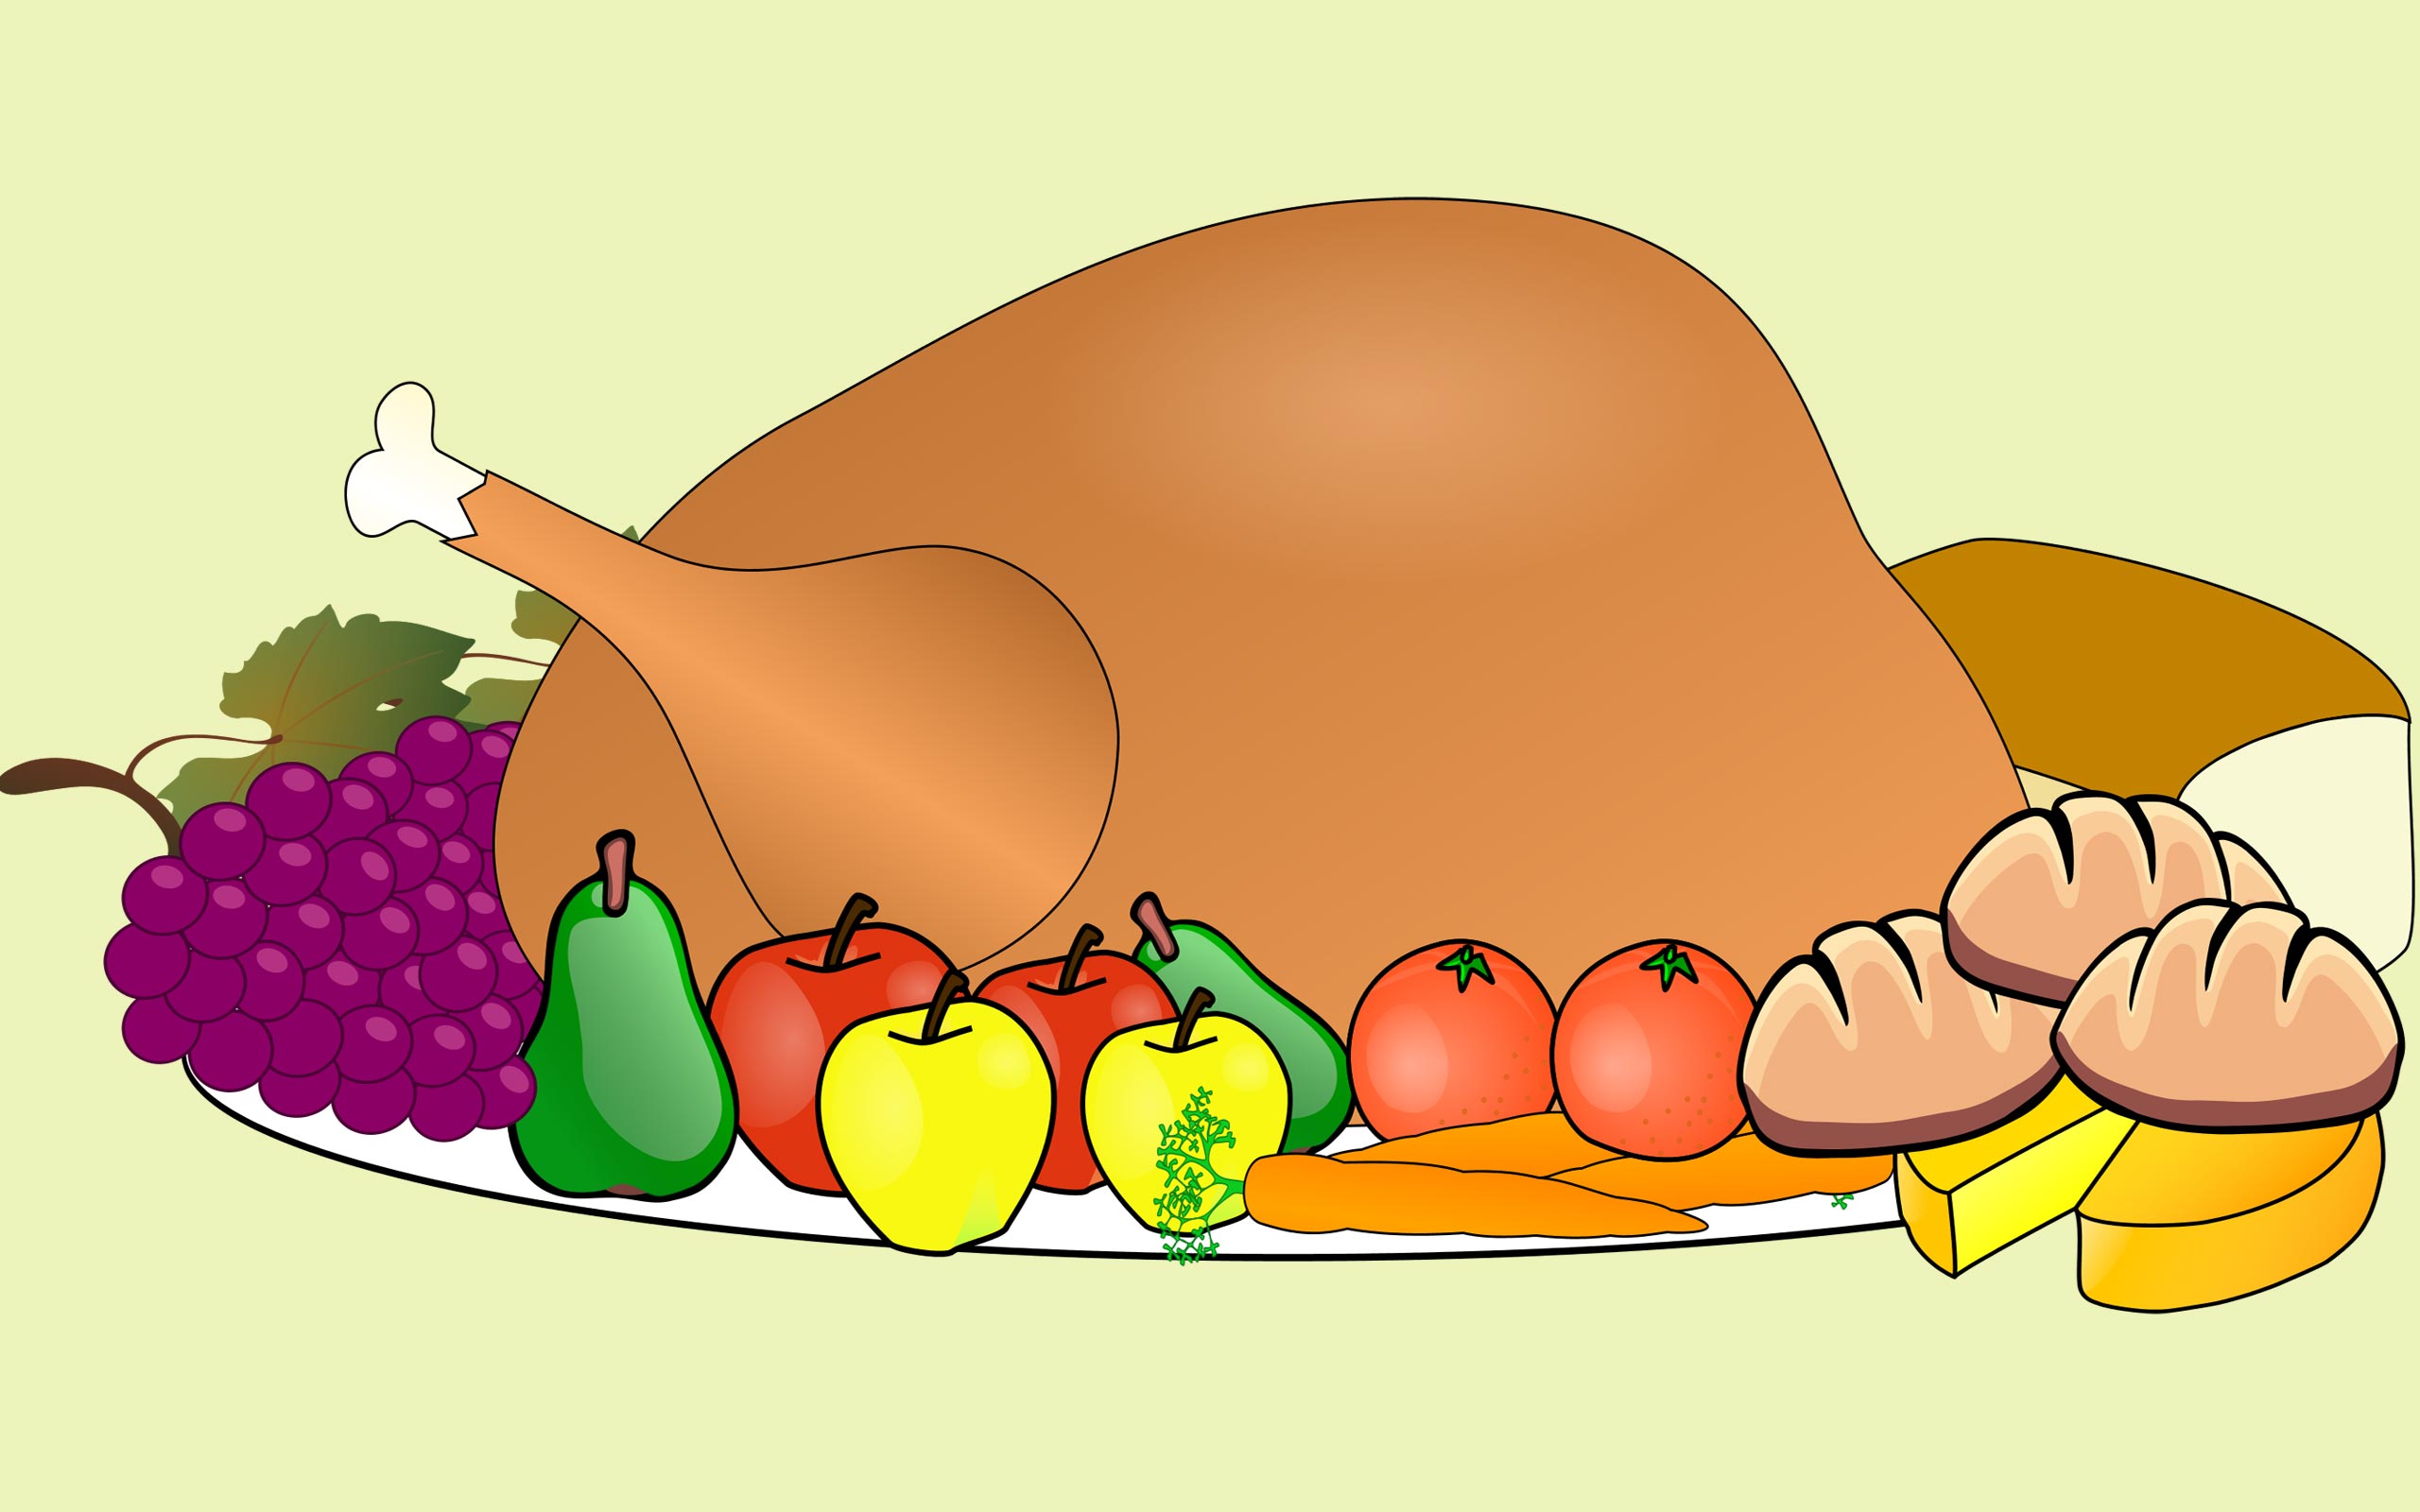 Thanksgiving Food Clip Art for November Pictures | Download Free ...